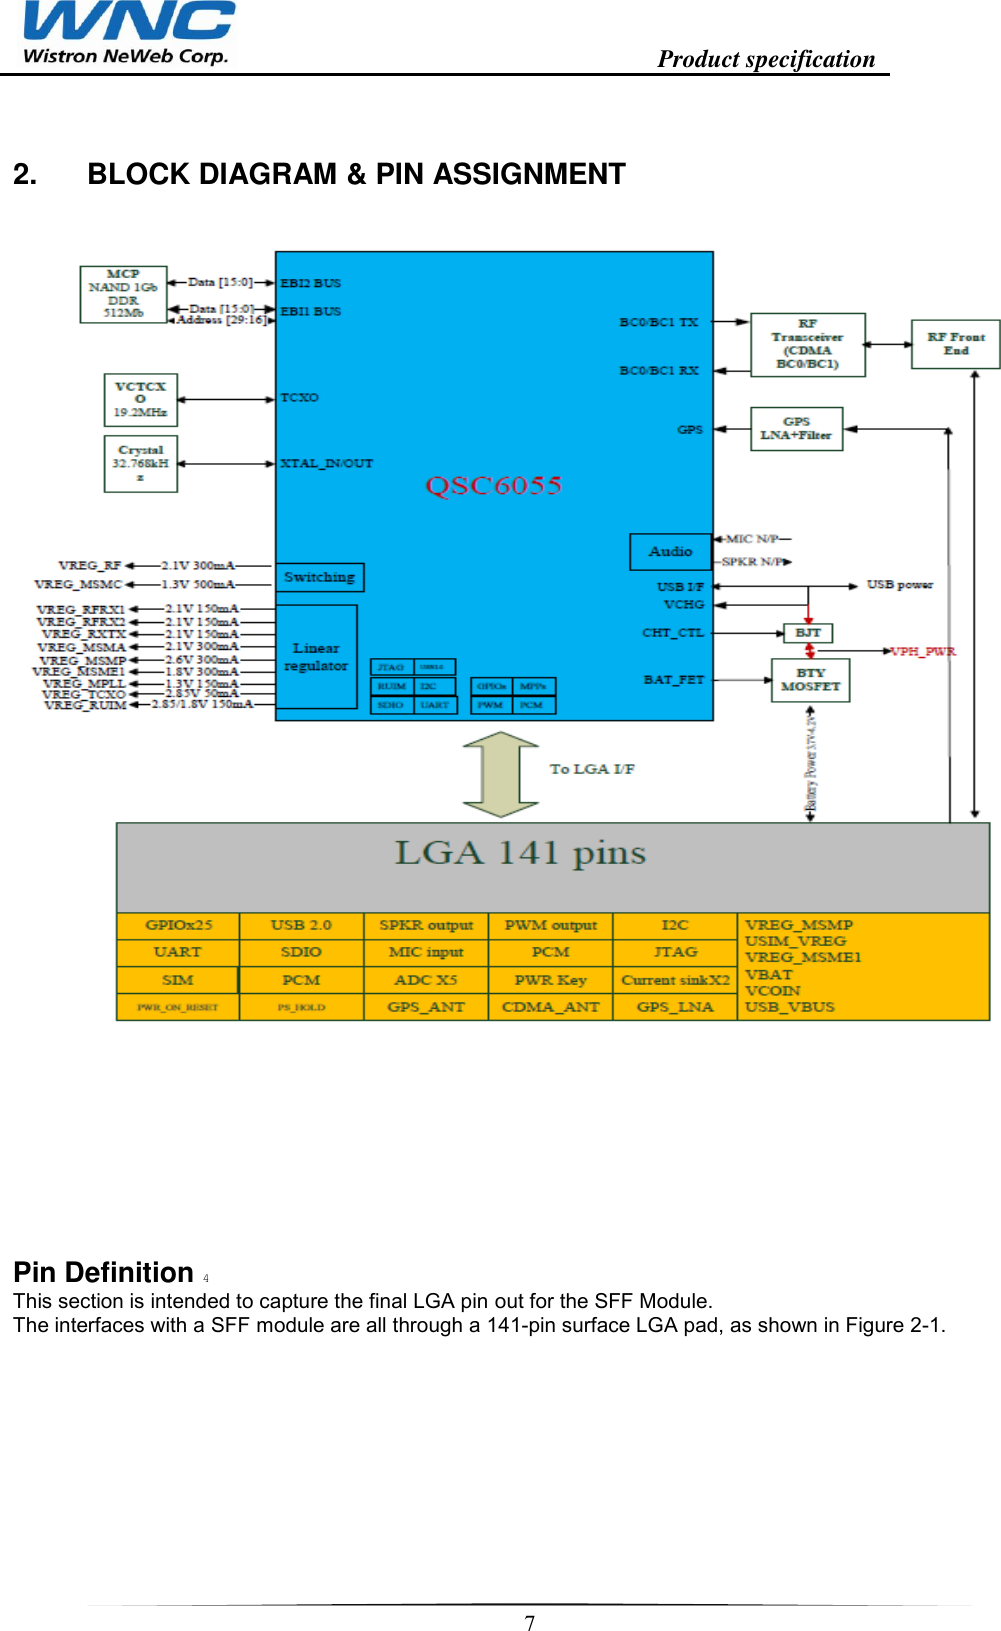                                                                    Product specification    7  2.  BLOCK DIAGRAM &amp; PIN ASSIGNMENT          Pin Definition 4 This section is intended to capture the final LGA pin out for the SFF Module. The interfaces with a SFF module are all through a 141-pin surface LGA pad, as shown in Figure 2-1.     